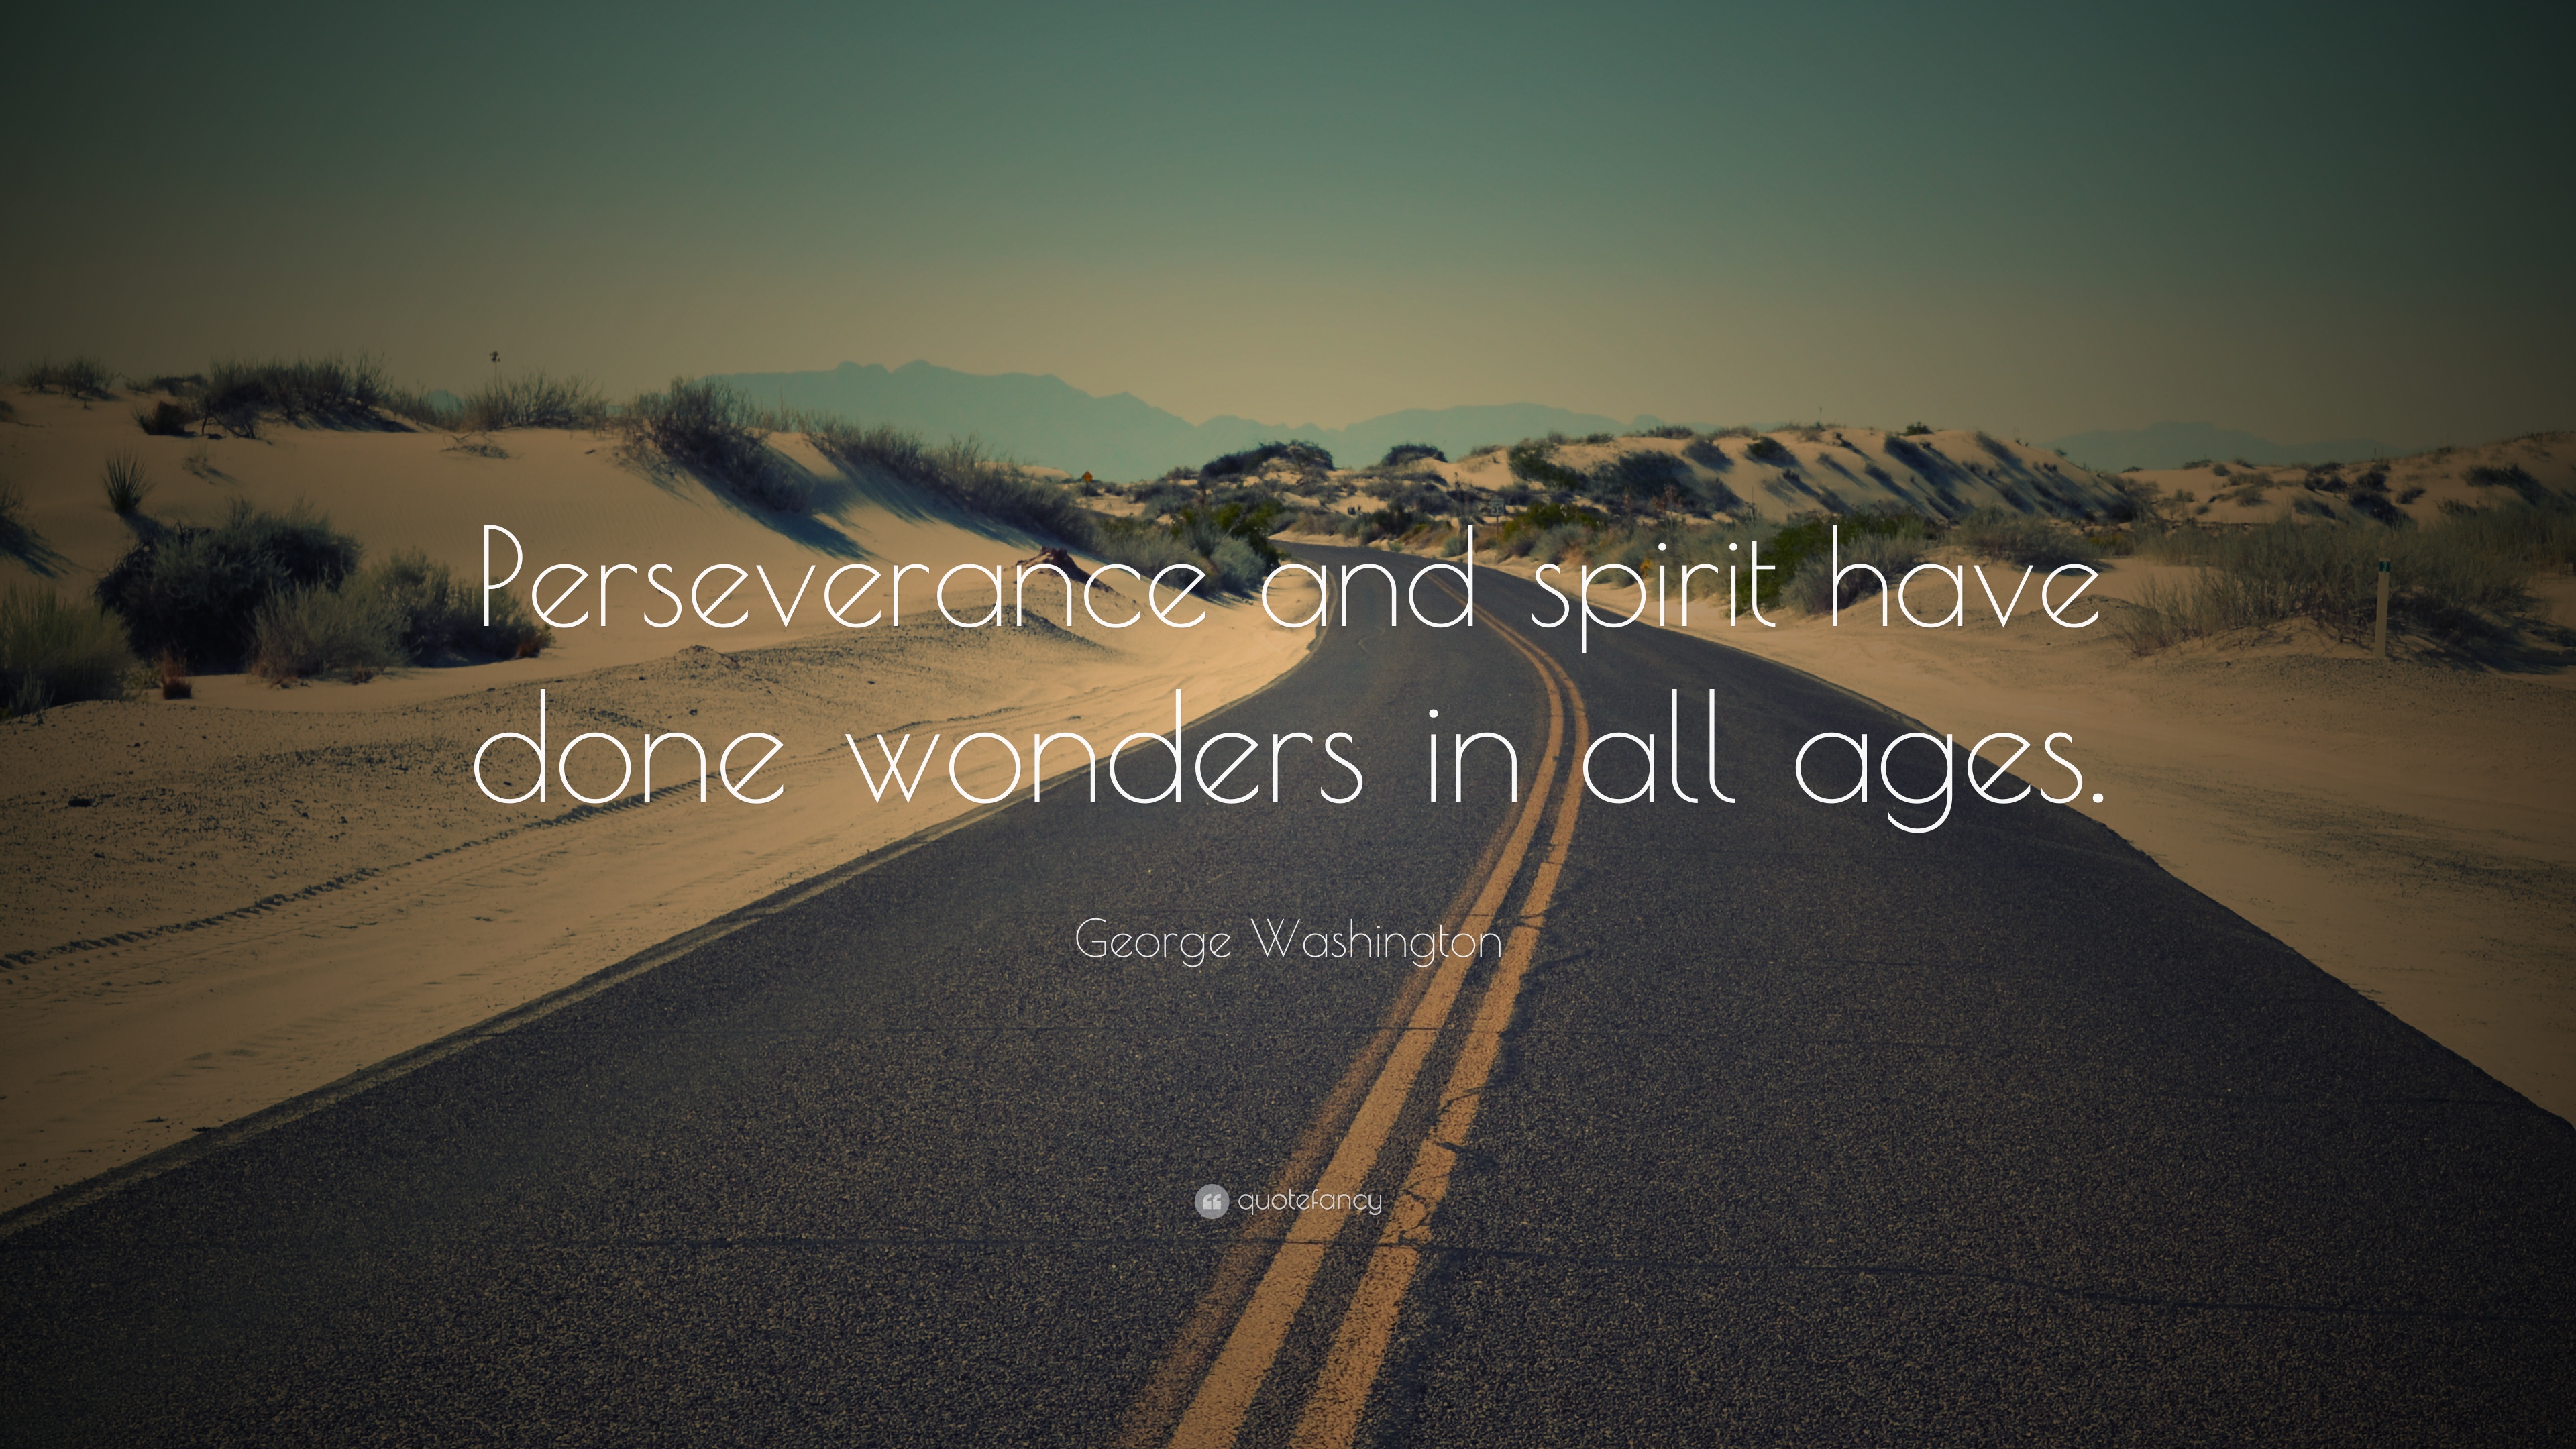 Perseverance Quotes (36 wallpapers) - Quotefancy